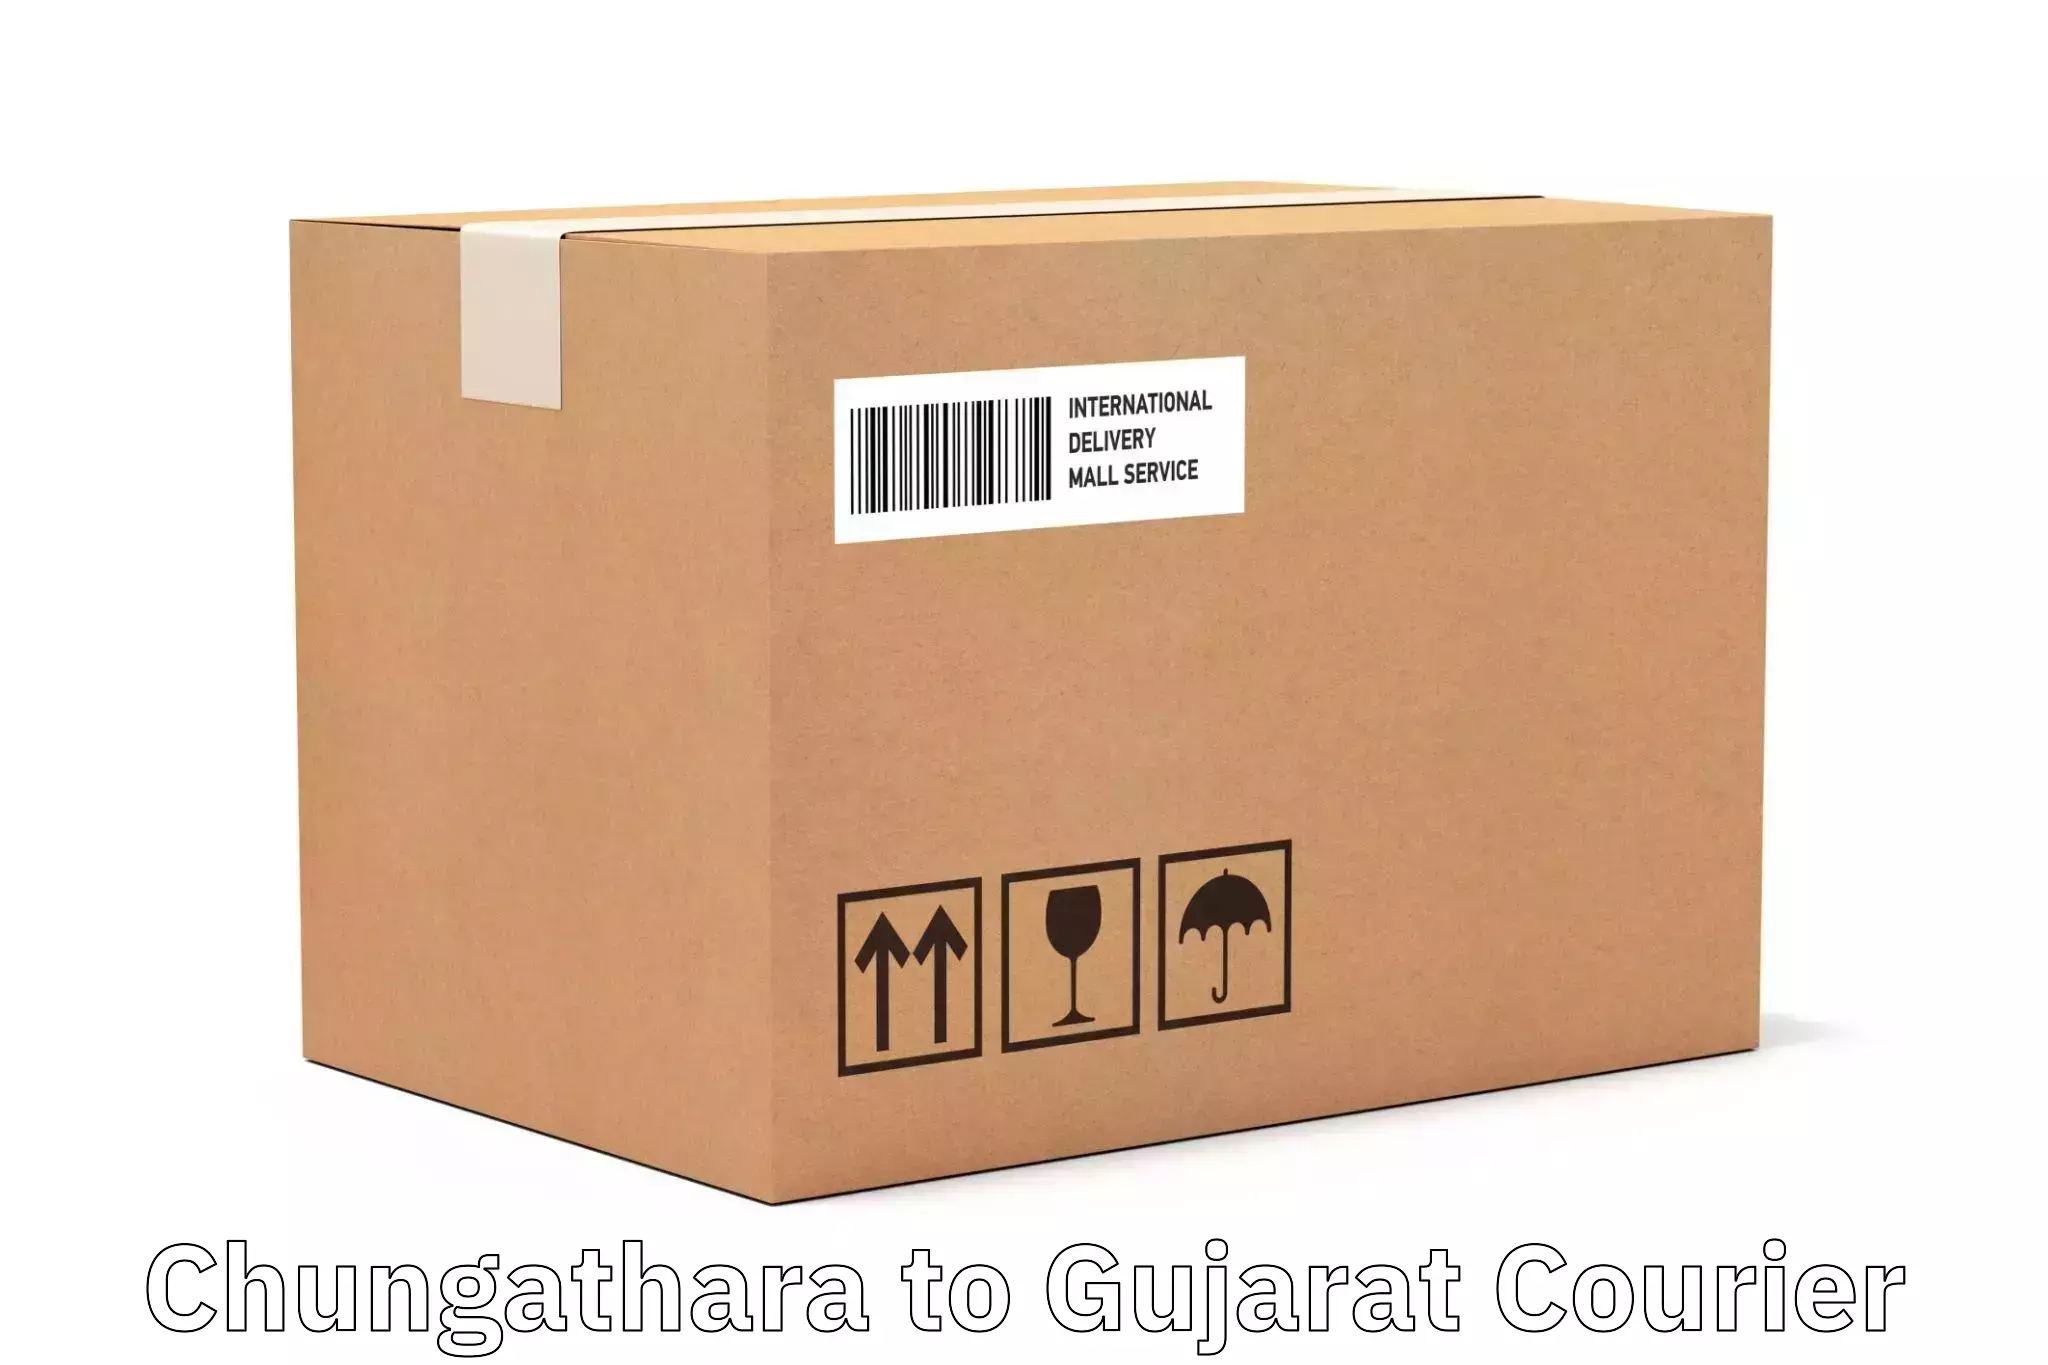 Overnight delivery services Chungathara to Gujarat